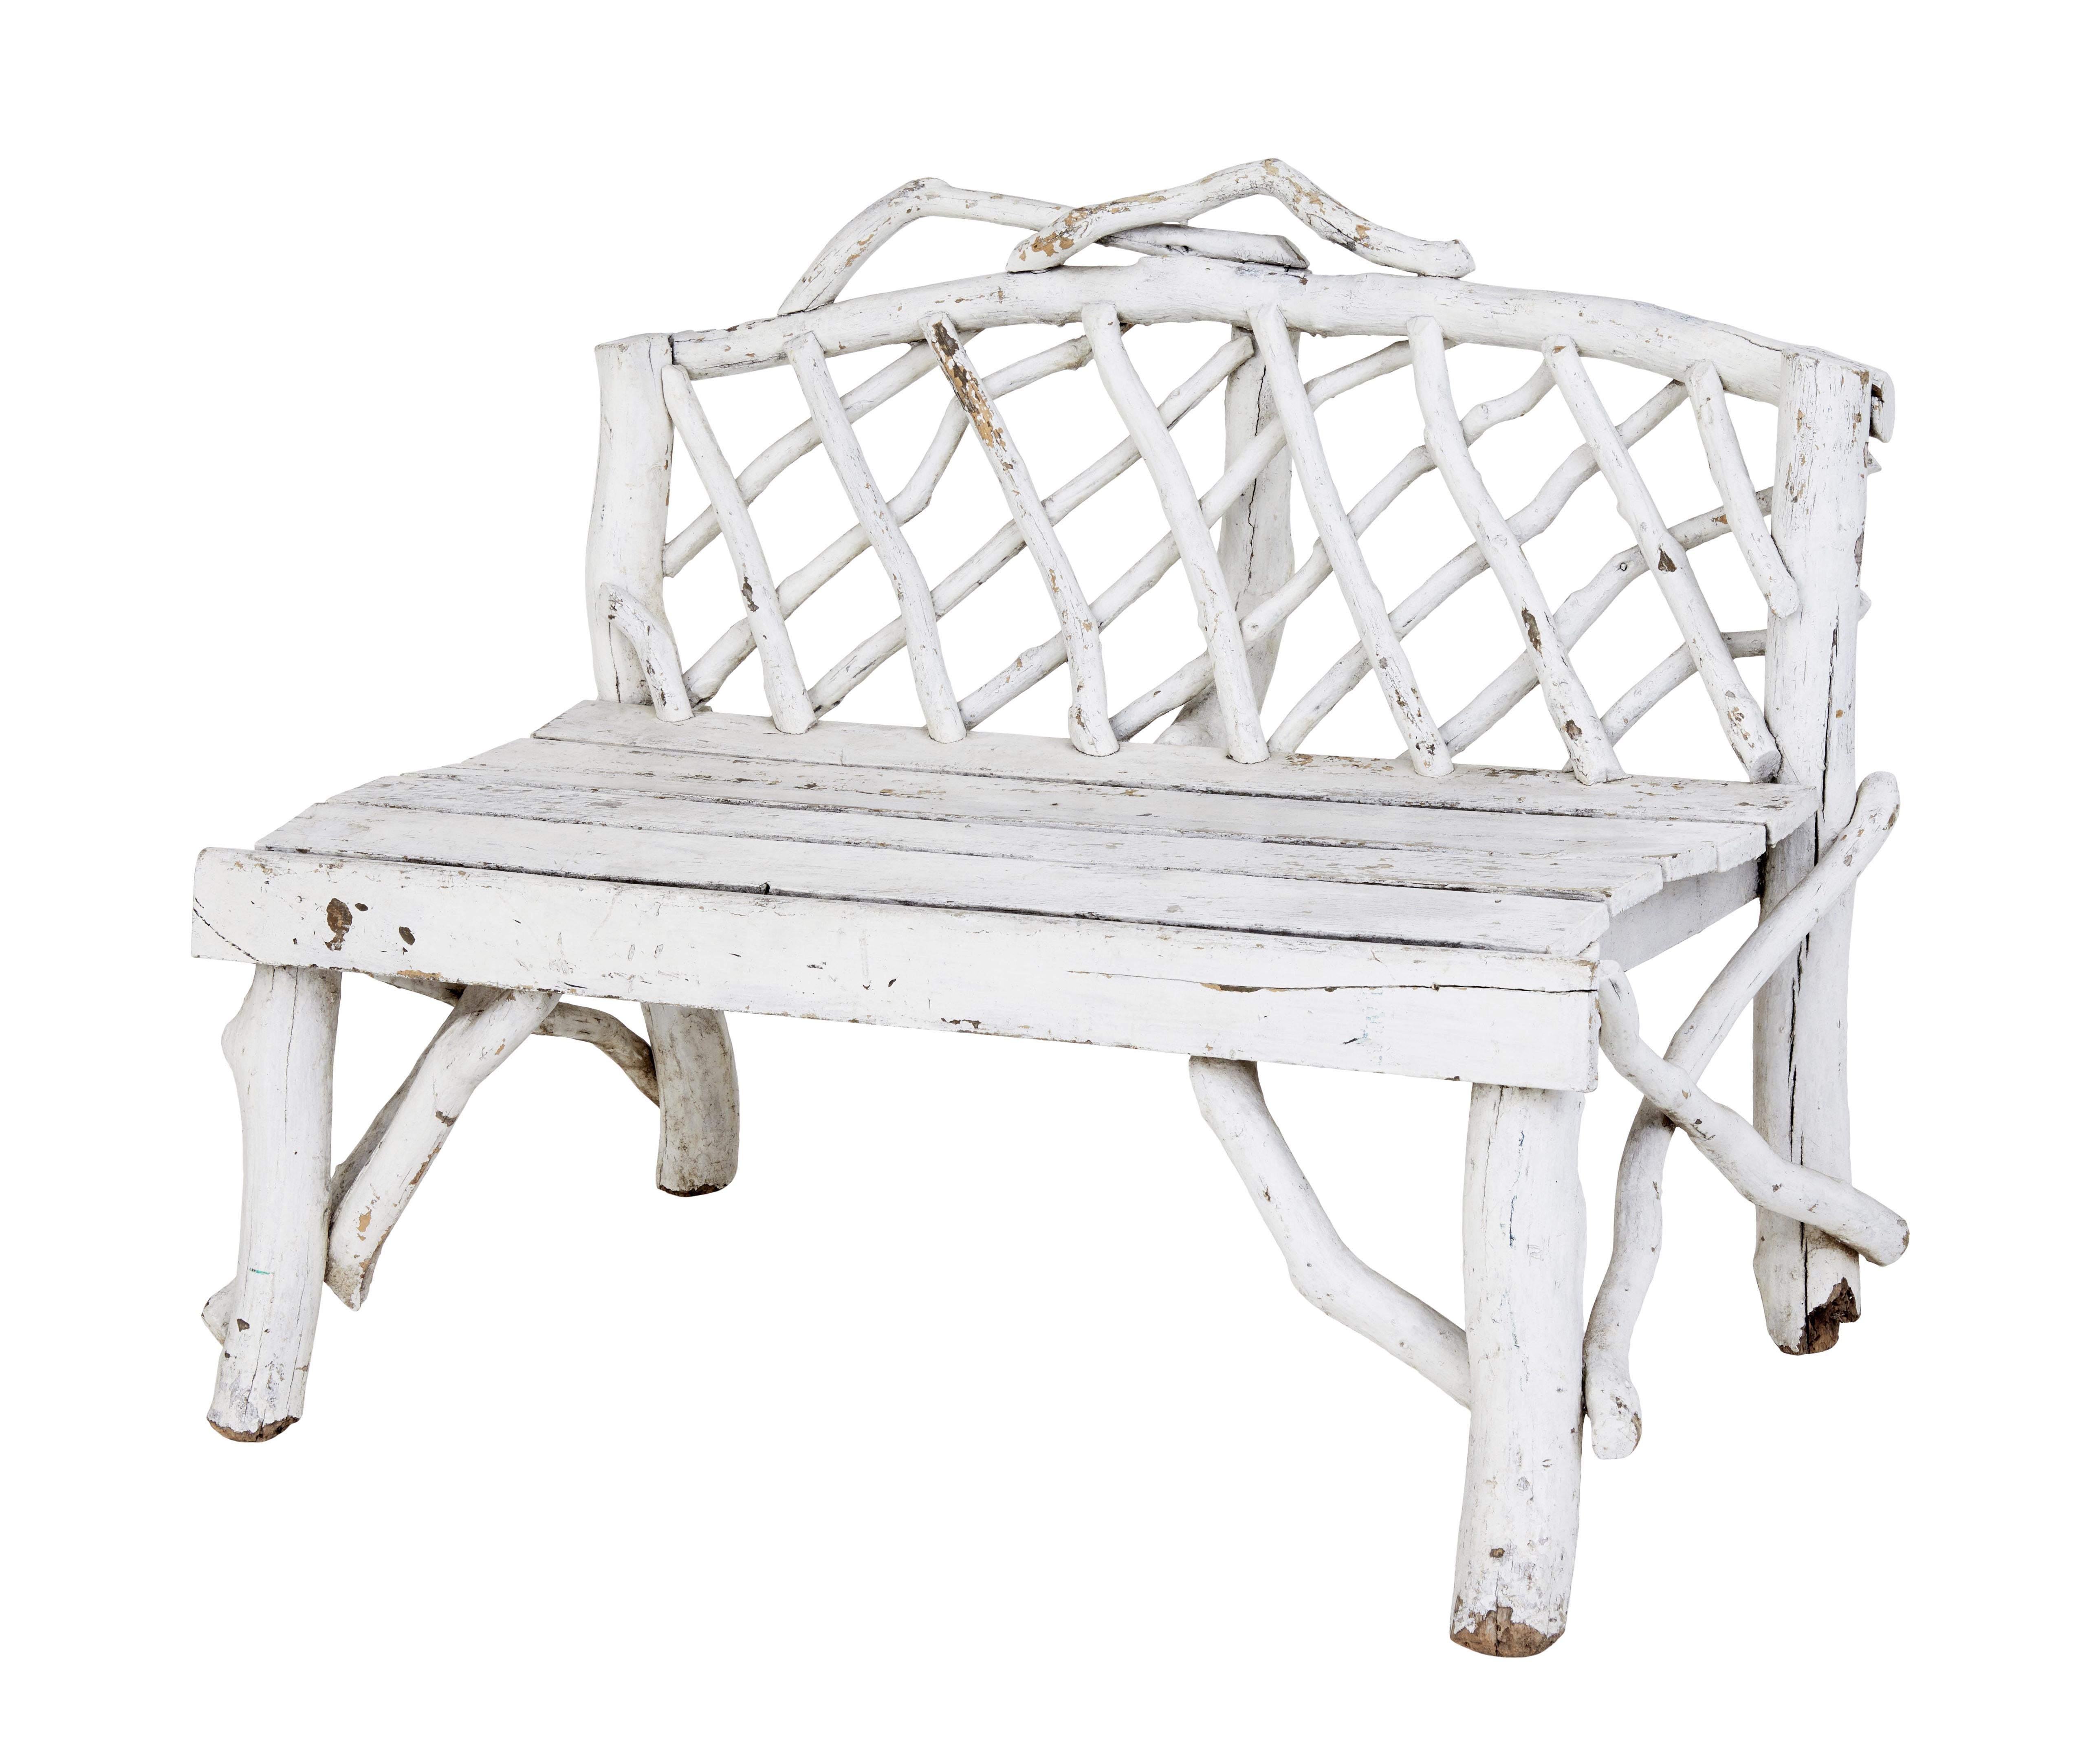 Late 19th century 4-piece bentwood garden furniture, circa 1890.

Unusual Swedish made garden set comprising of 2 chairs, sofa and a table. Made from naturally sourced birch then arranged to form this Folk Art style furniture.

Painted white